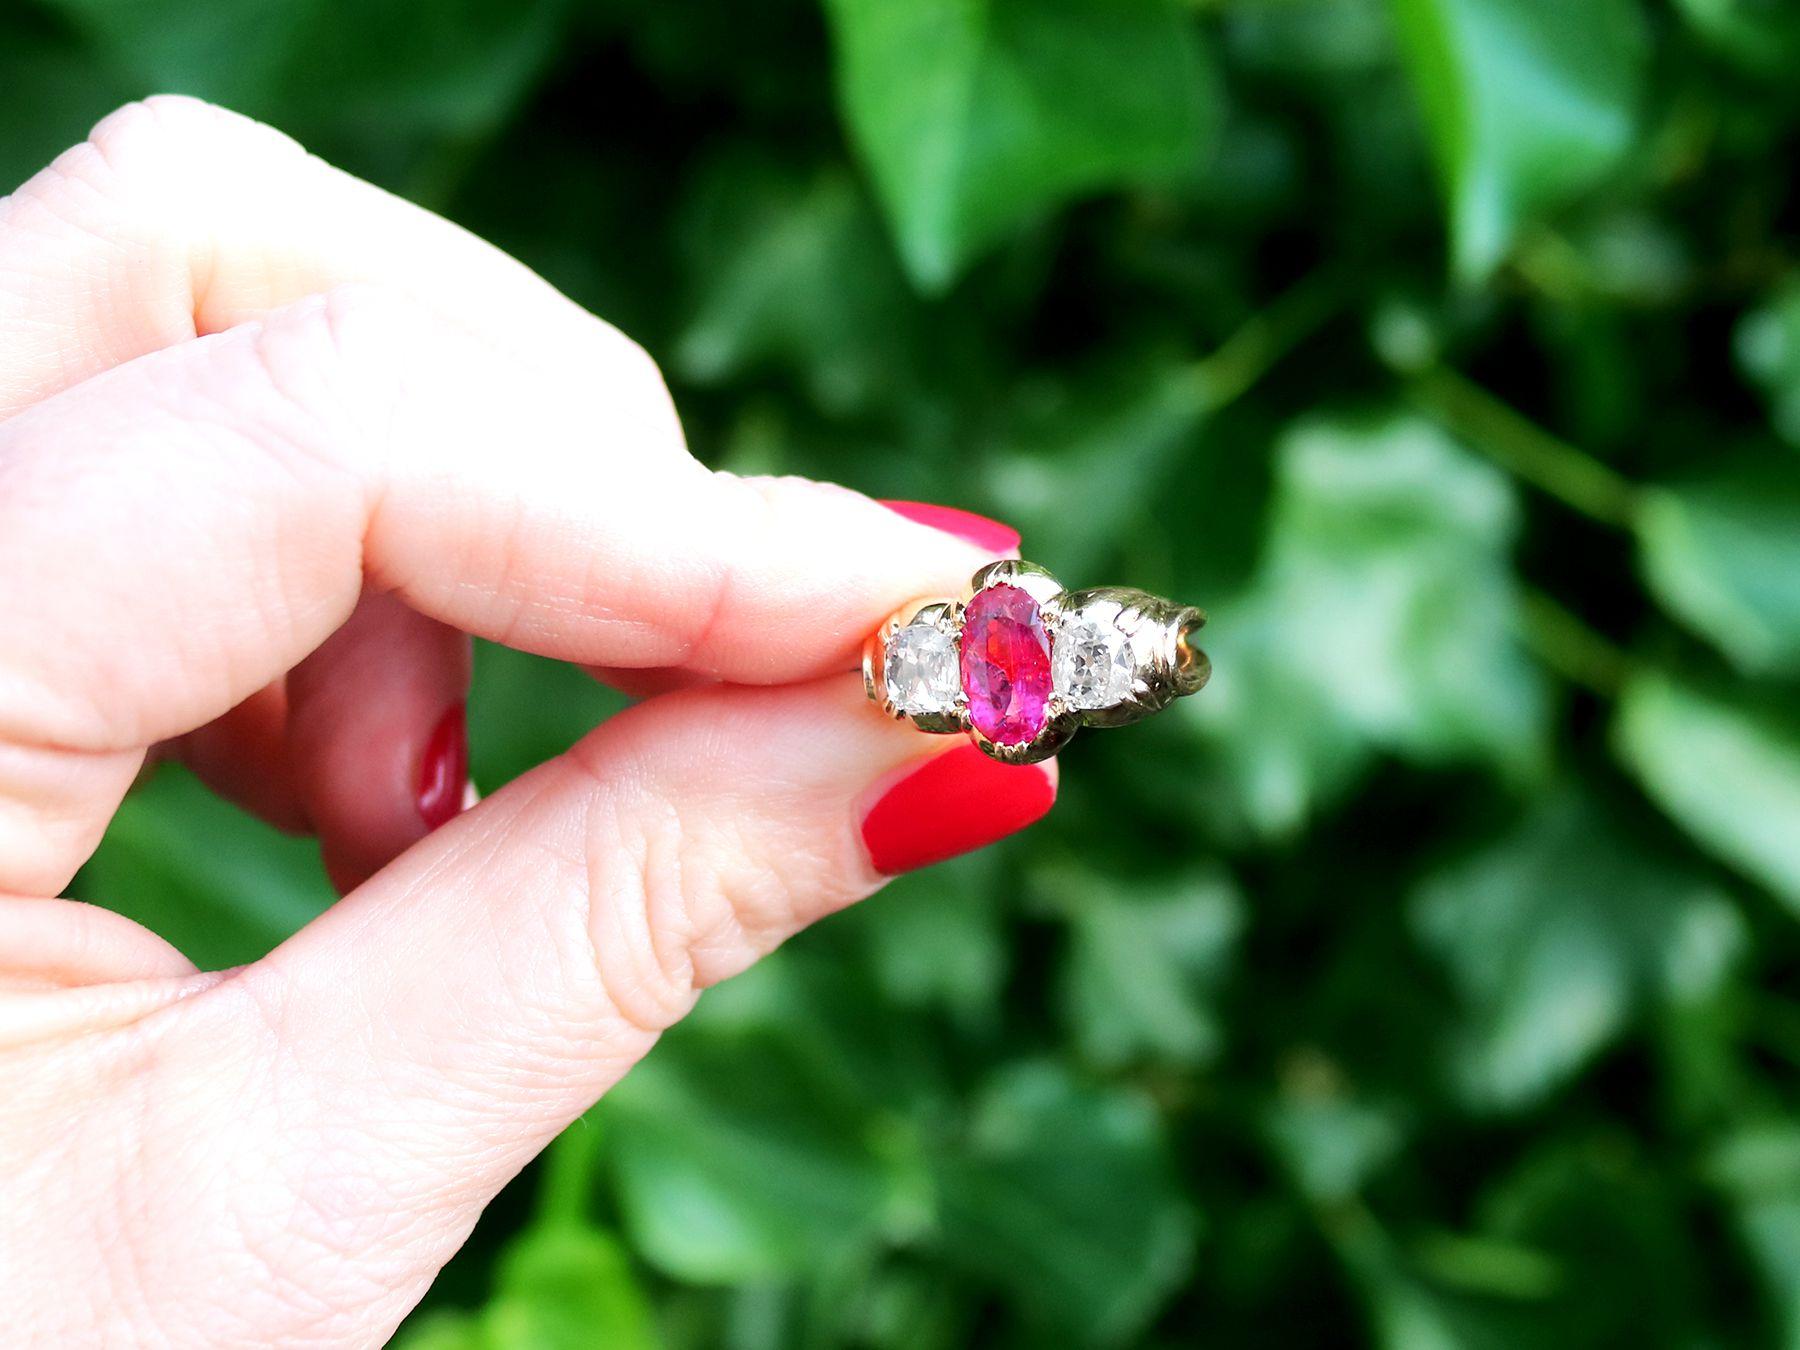 A stunning, fine, and impressive antique Victorian 2 carat Burmese ruby and 0.89 carat diamond, 18 karat yellow gold cocktail ring; part of our diverse antique estate jewelry collections.

This impressive antique diamond and Victorian ruby ring has